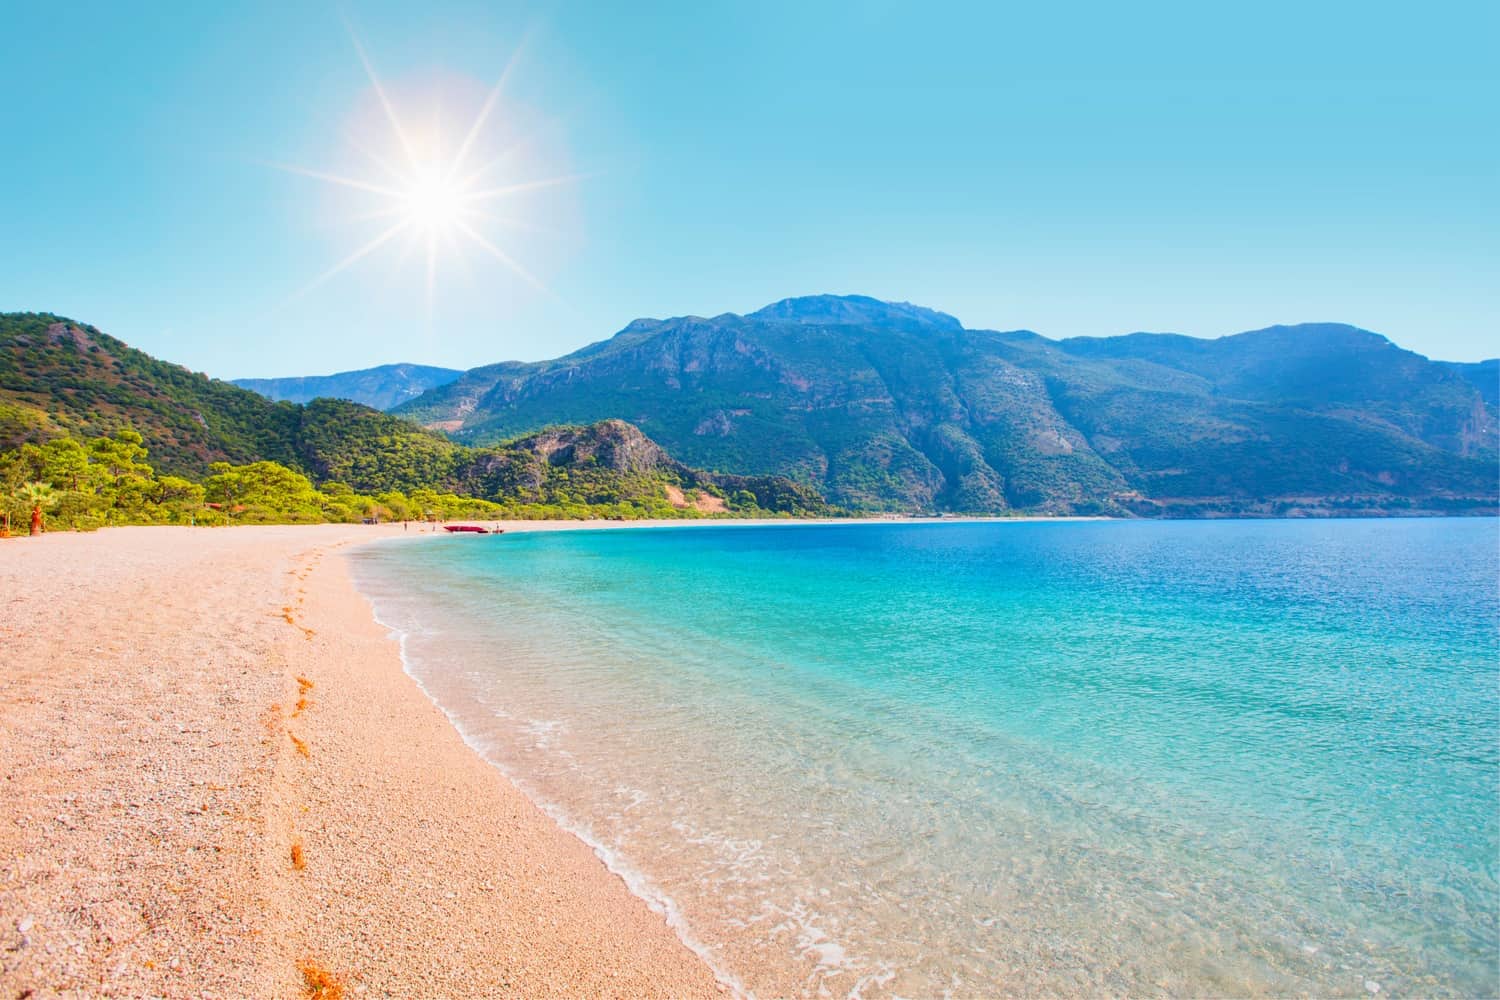 Oludeniz beach in Turkey, with golden sand and small pebbles, surrounded by hills and mountains.